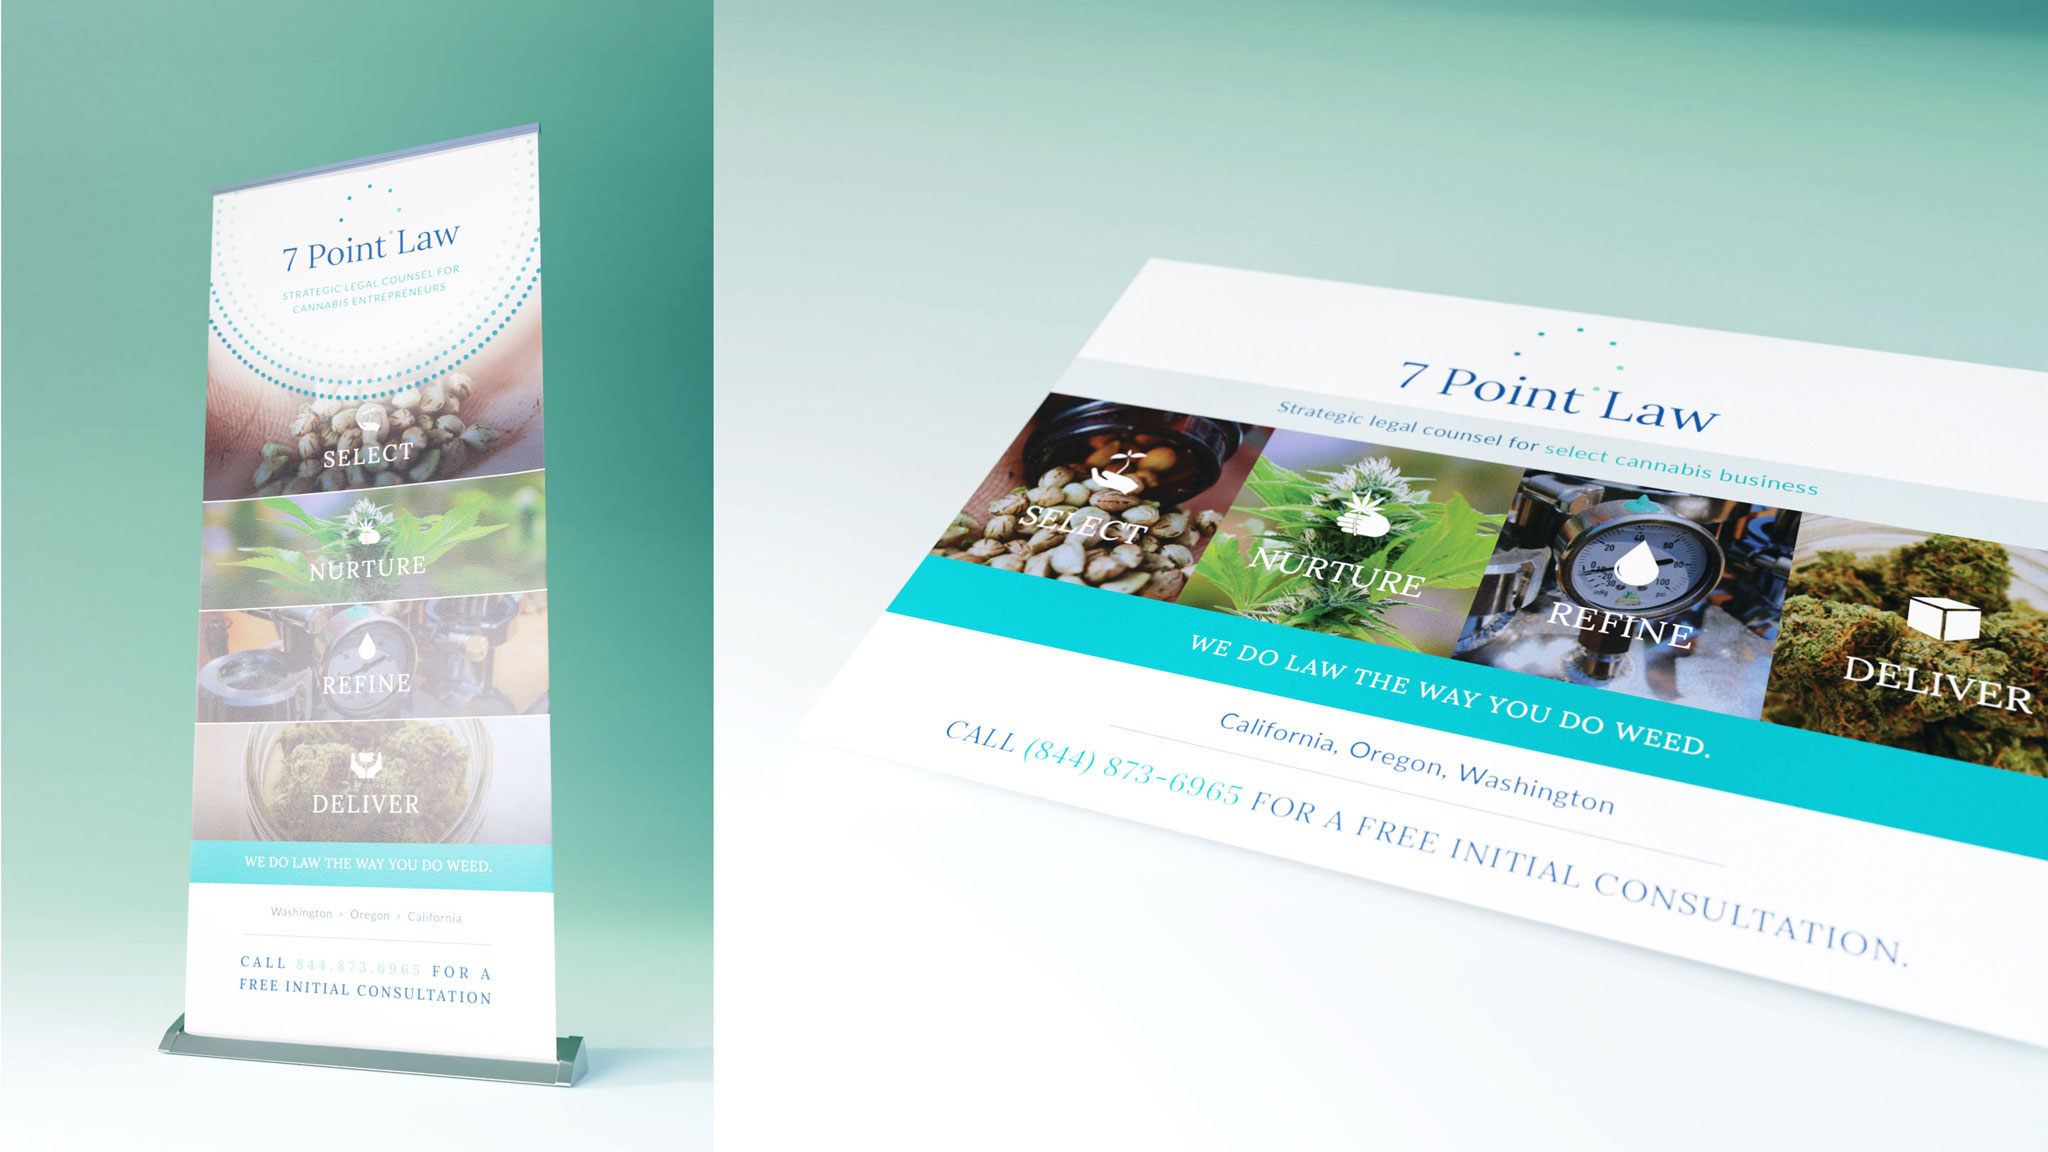 Advertising materials for 7 Point Law brand redesign